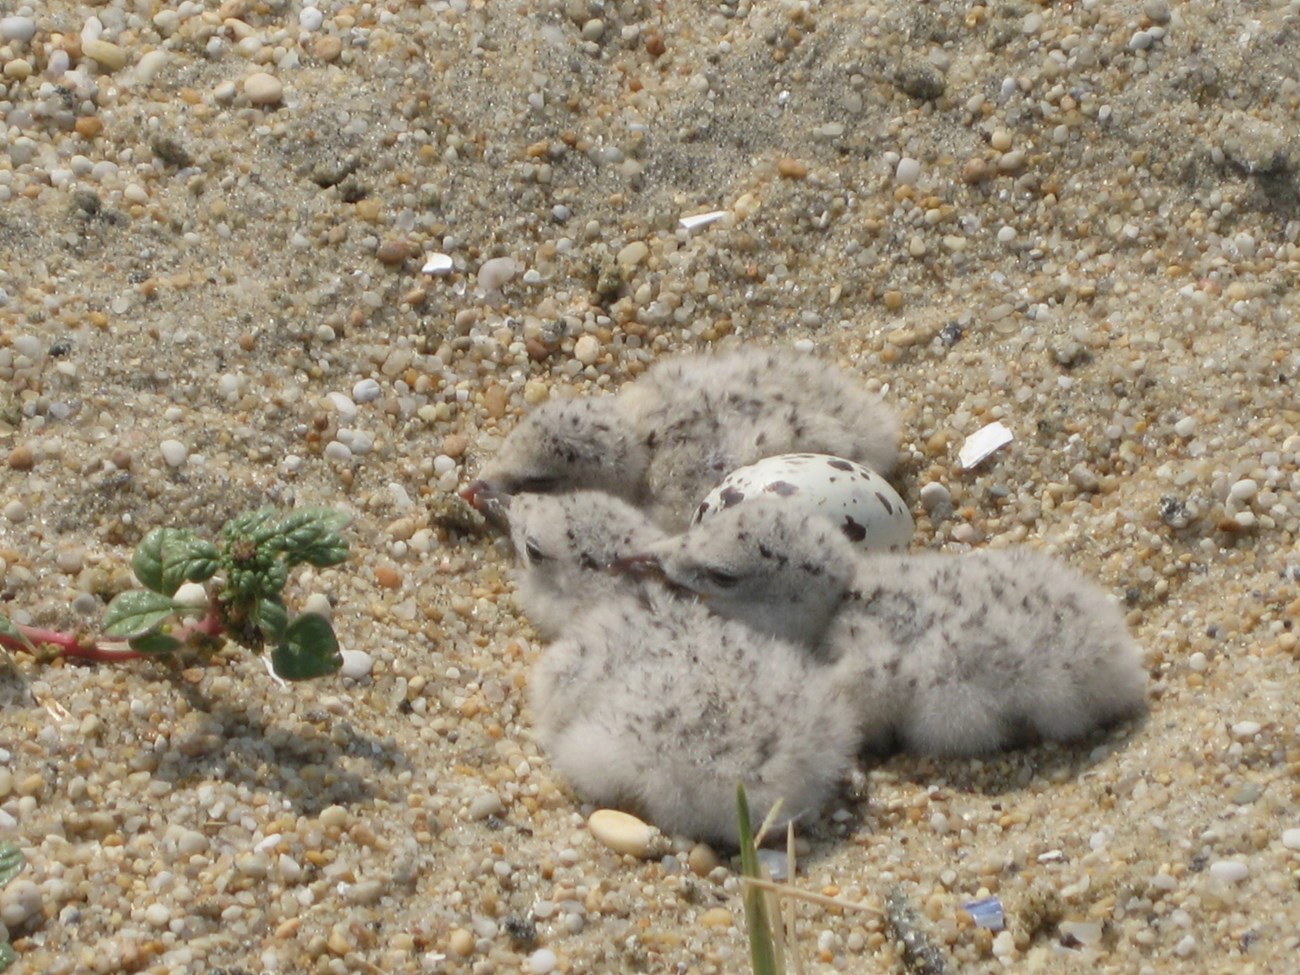 Plover chicks and eggs on the beach